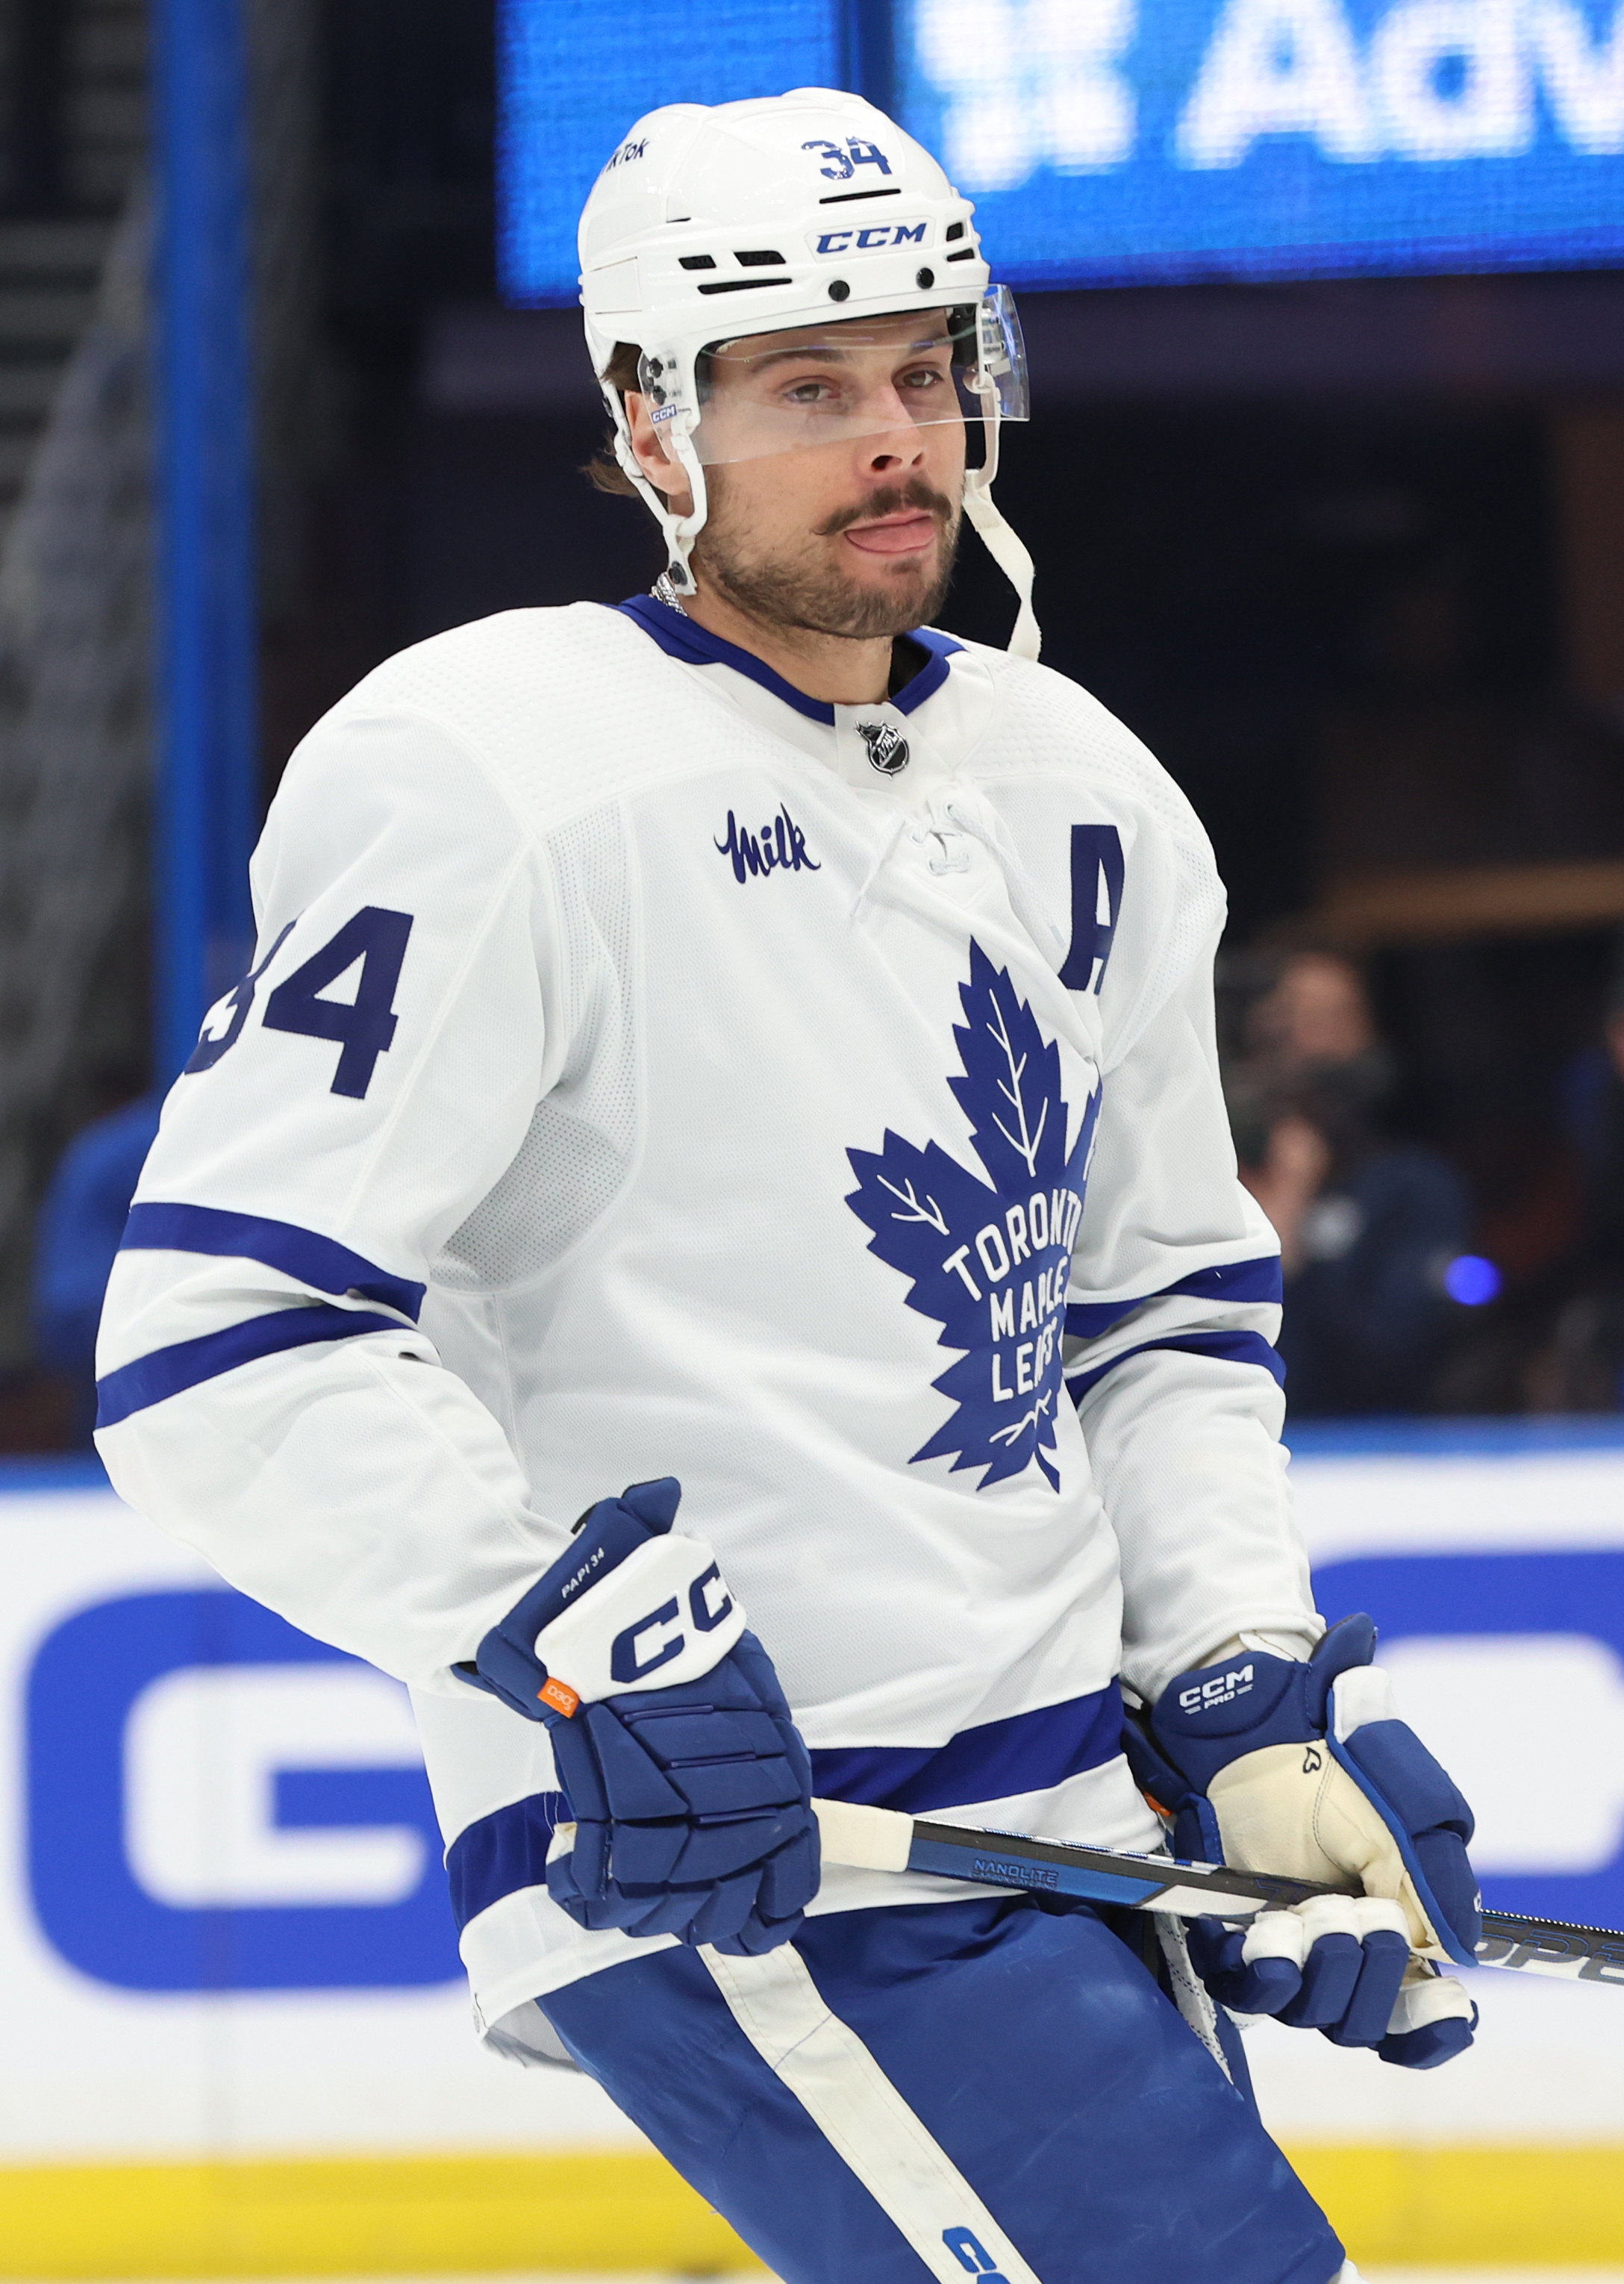 Toronto Maple Leafs defeat Tampa Bay Lightning 2-1 in overtime to